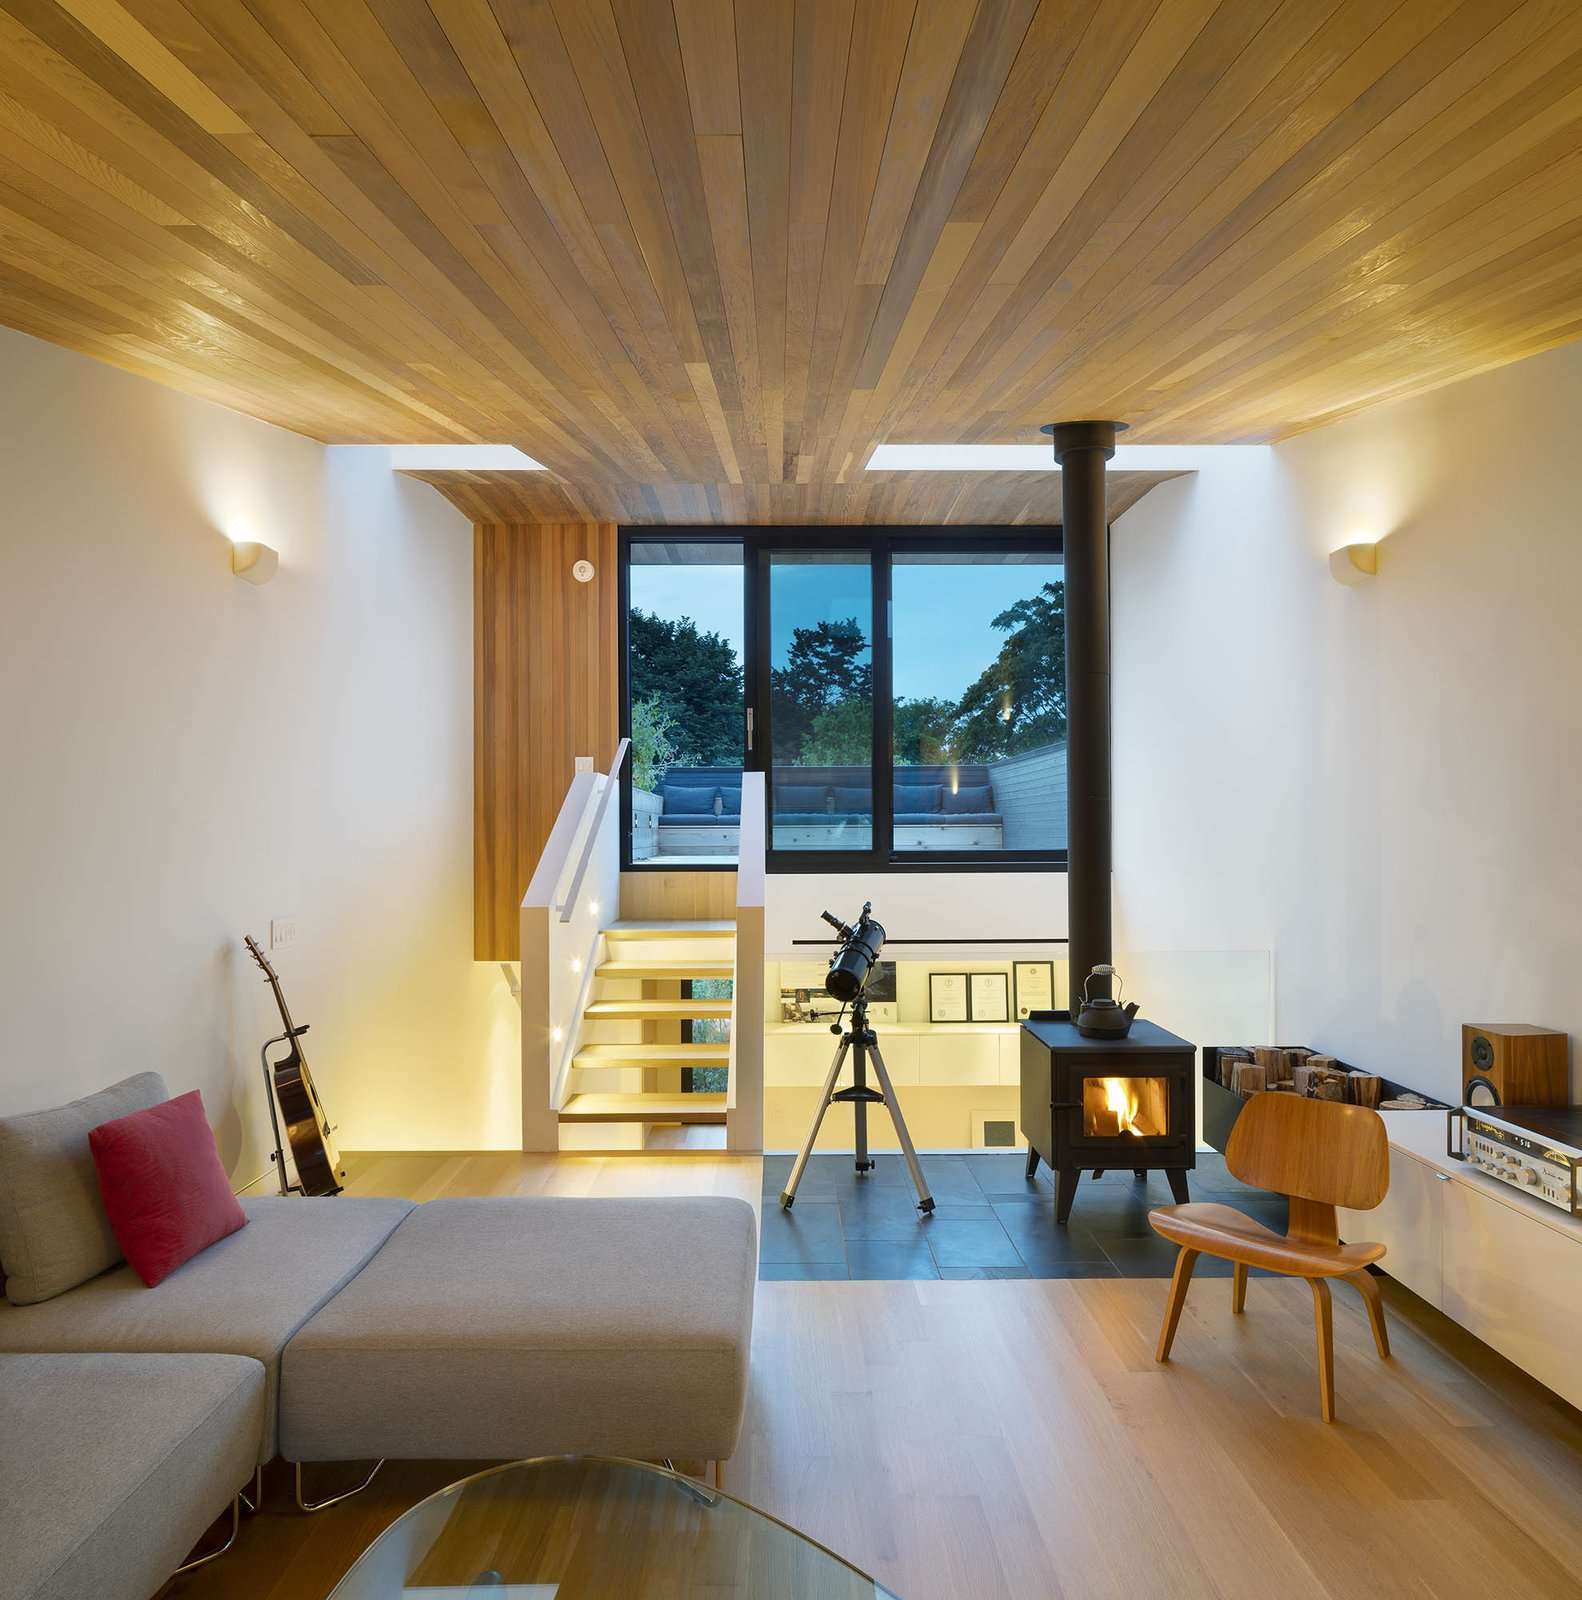 The third floor living room - an urbanized version of a cabin in the woods, with wood stove and cedar ceiling. It nestles intimately into tree tops at one end, and opens widely toward the sky at the other.